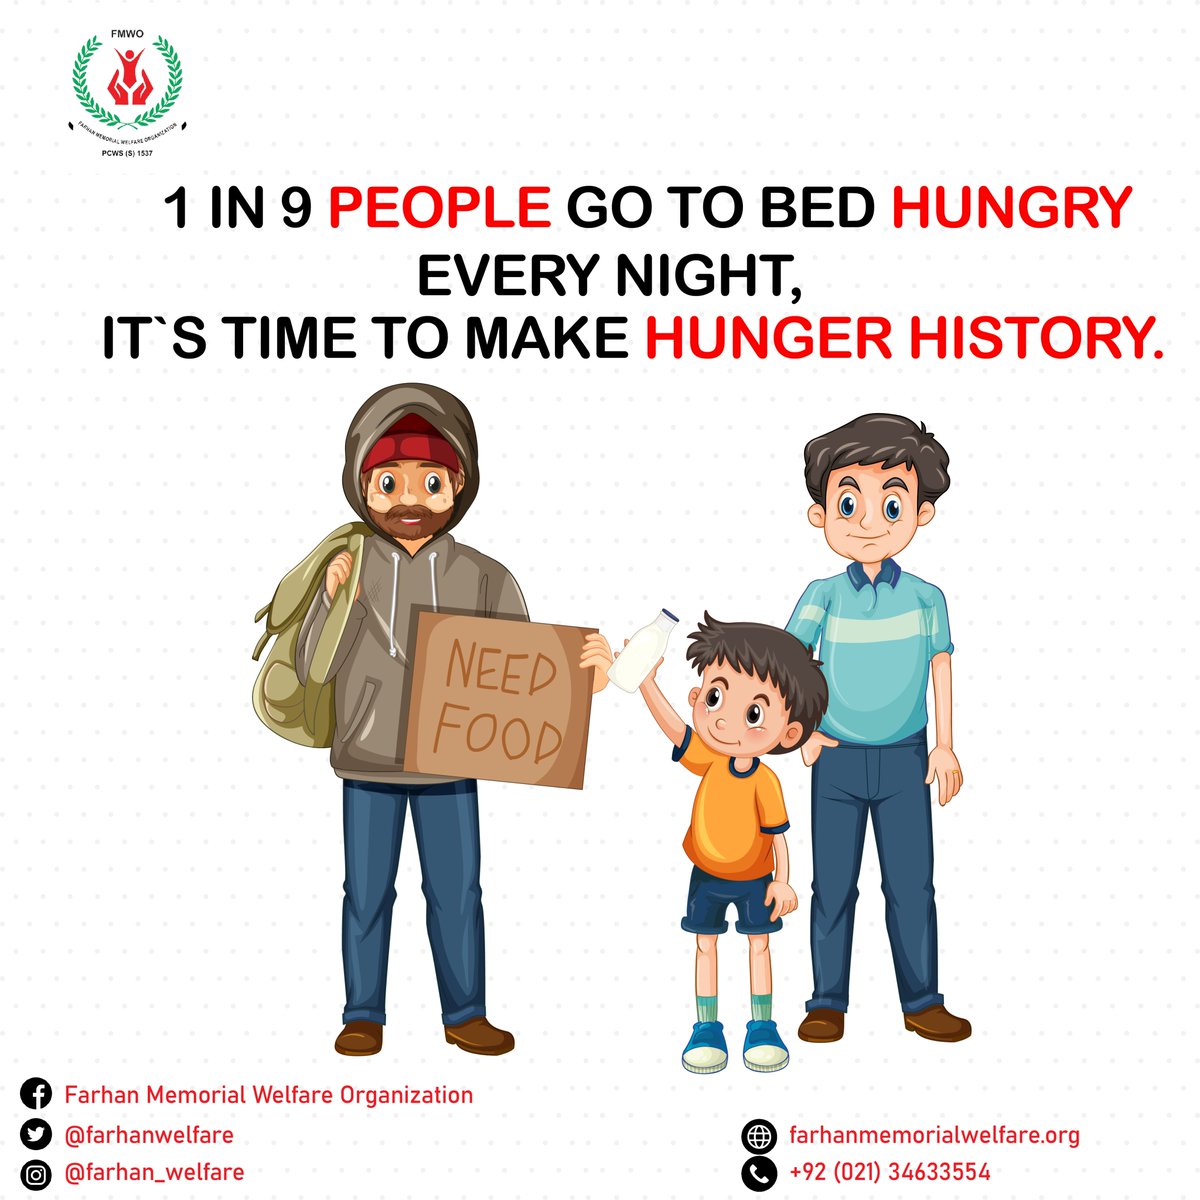 Silence hunger's roar with the thunder of compassion! Join the battle to eradicate world hunger and nourish hope.
#EndWorldHunger #HungerHero #globalchangemakers
Our Website: farhanmemorialwelfare.org
.
.
.
#farhanmemorialwelfare #fmwo #ngo #pakistanngo #donate #donatenow #charity